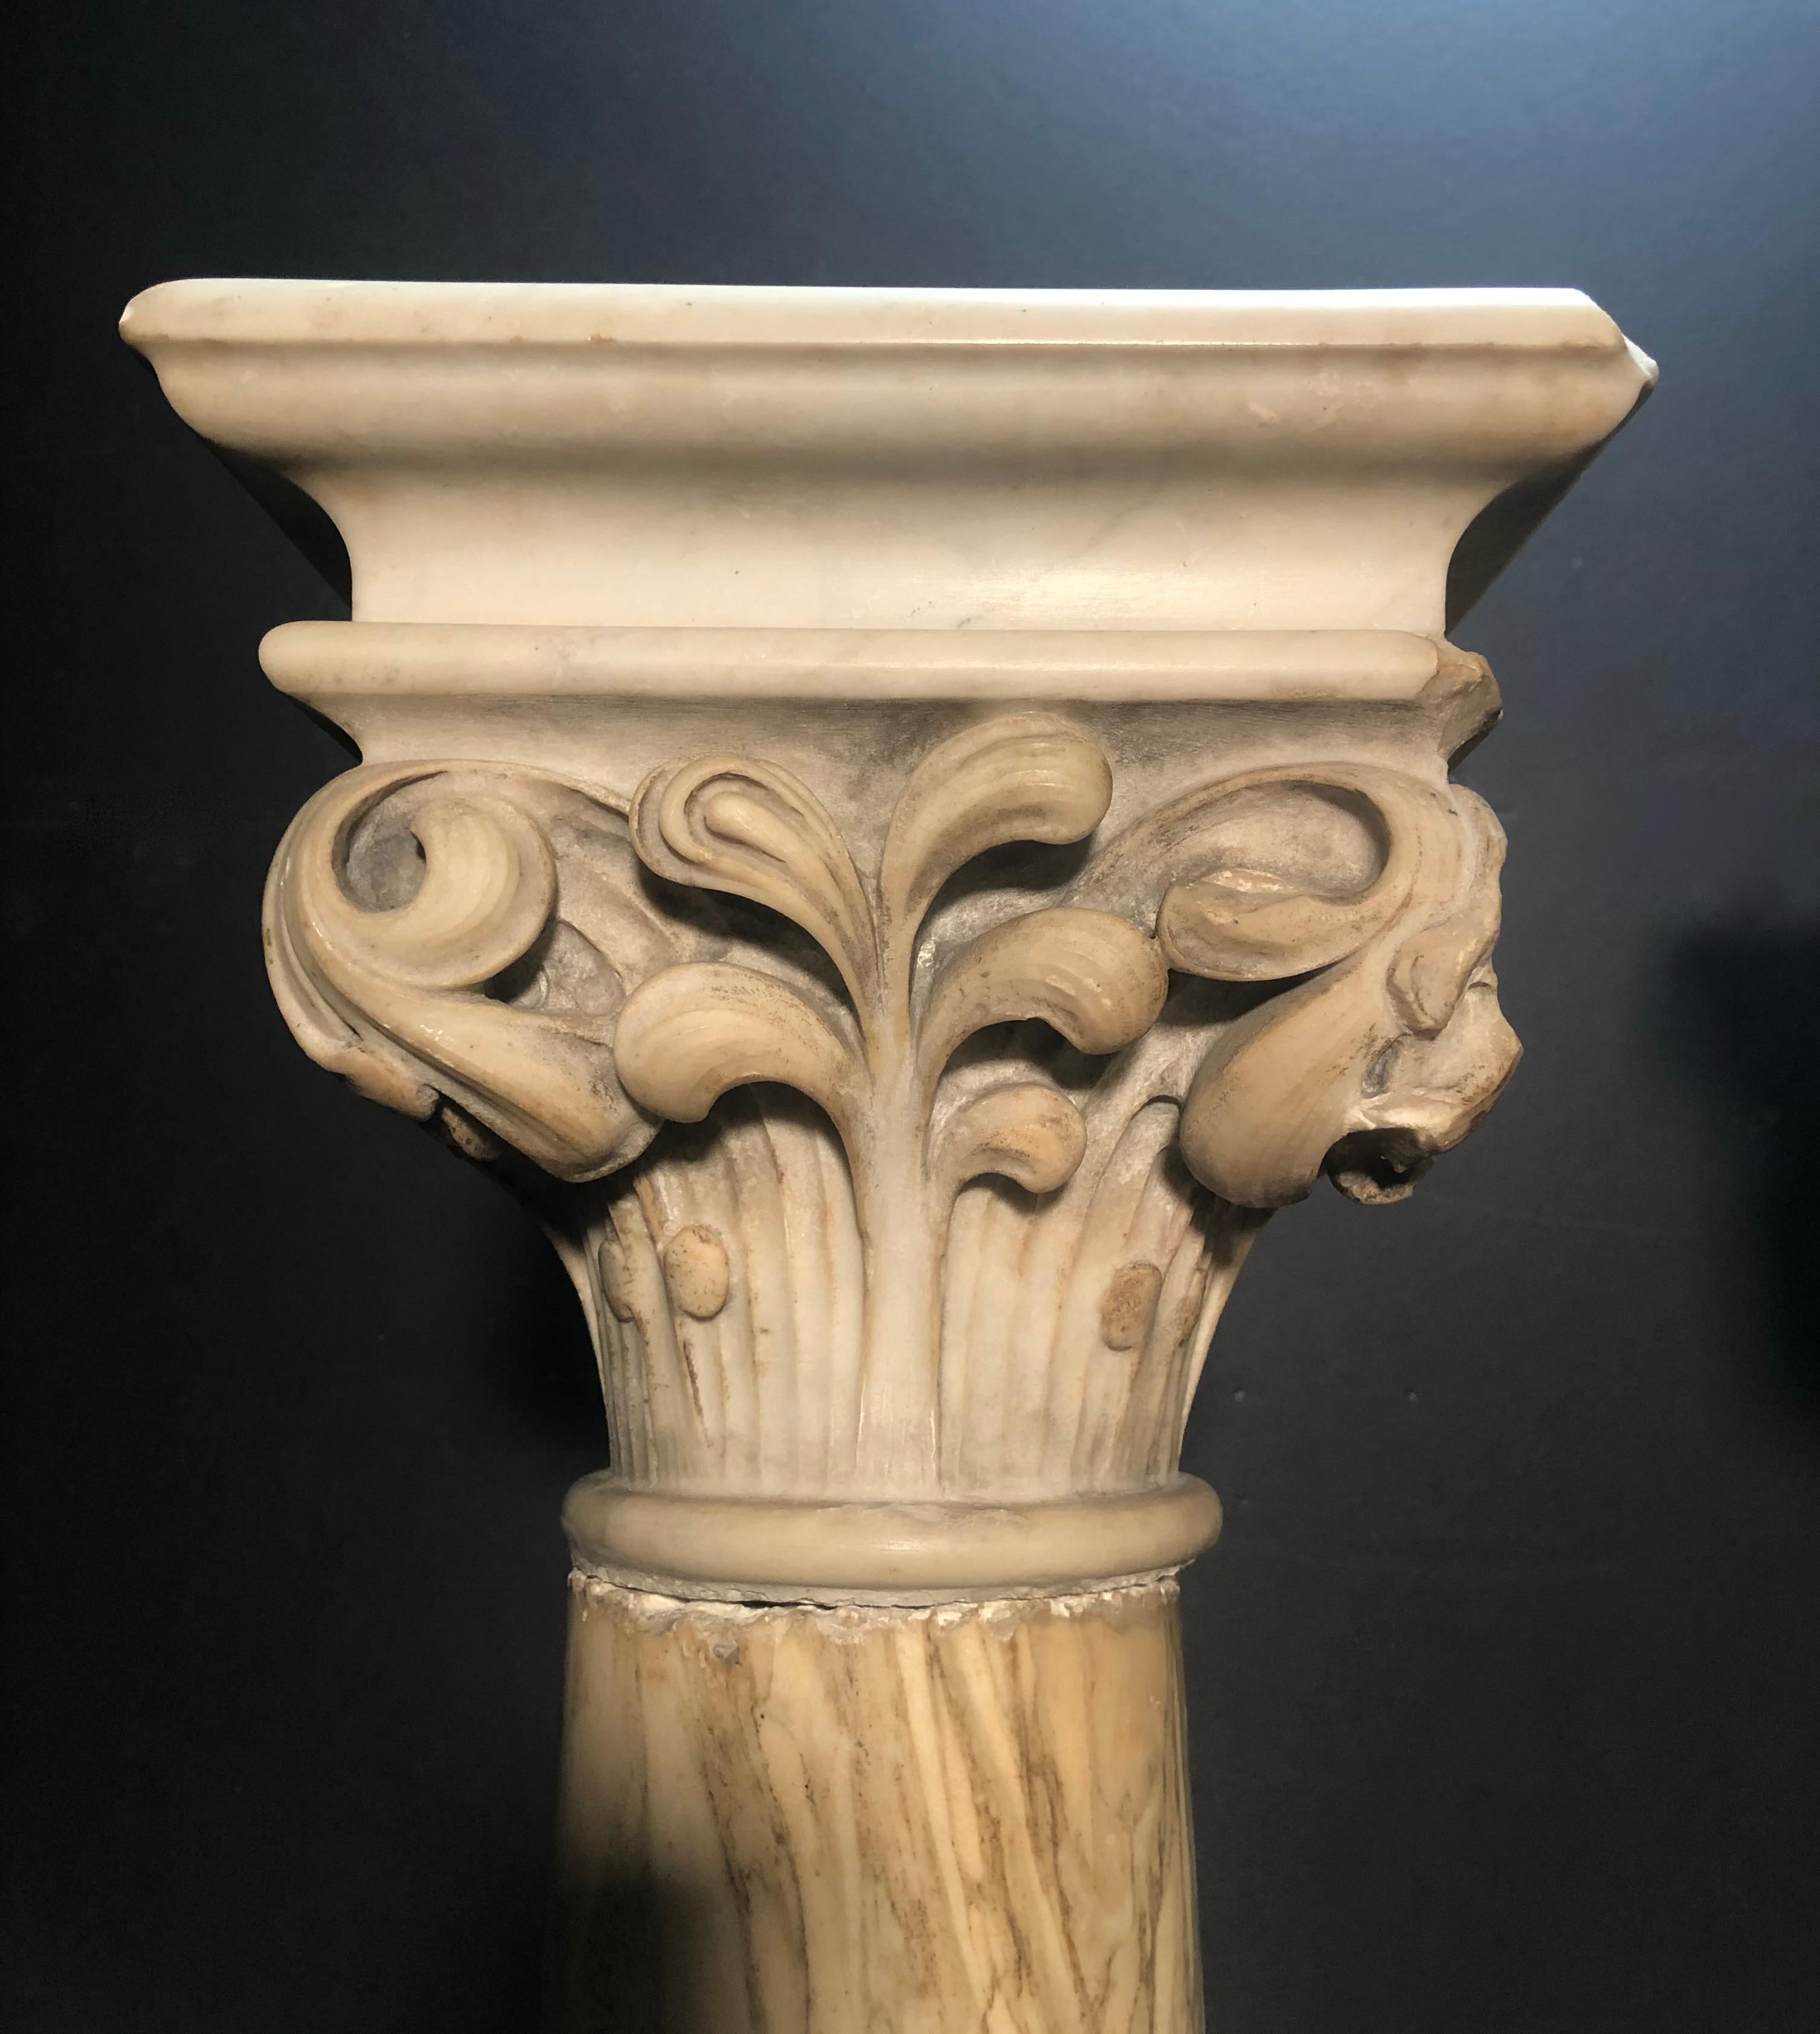 18th-19th century Grand Tour Italian carved marble pedestals in the Gothic style. Amazing carving. Great condition for this age.
Top surface 10.5